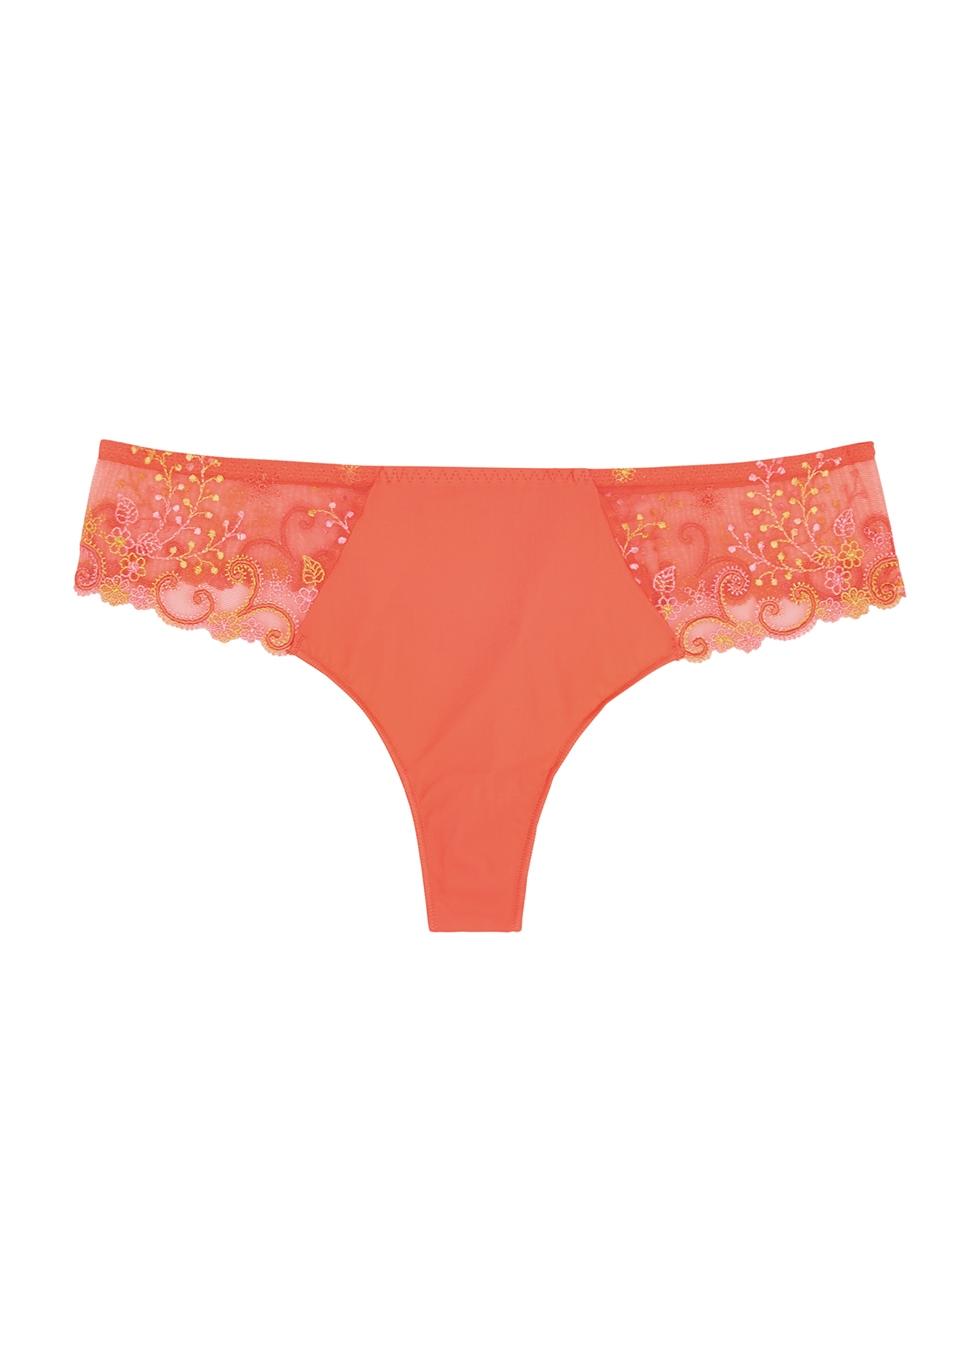 Simone Perele Delice Embroidered Thong in Orange | Lyst